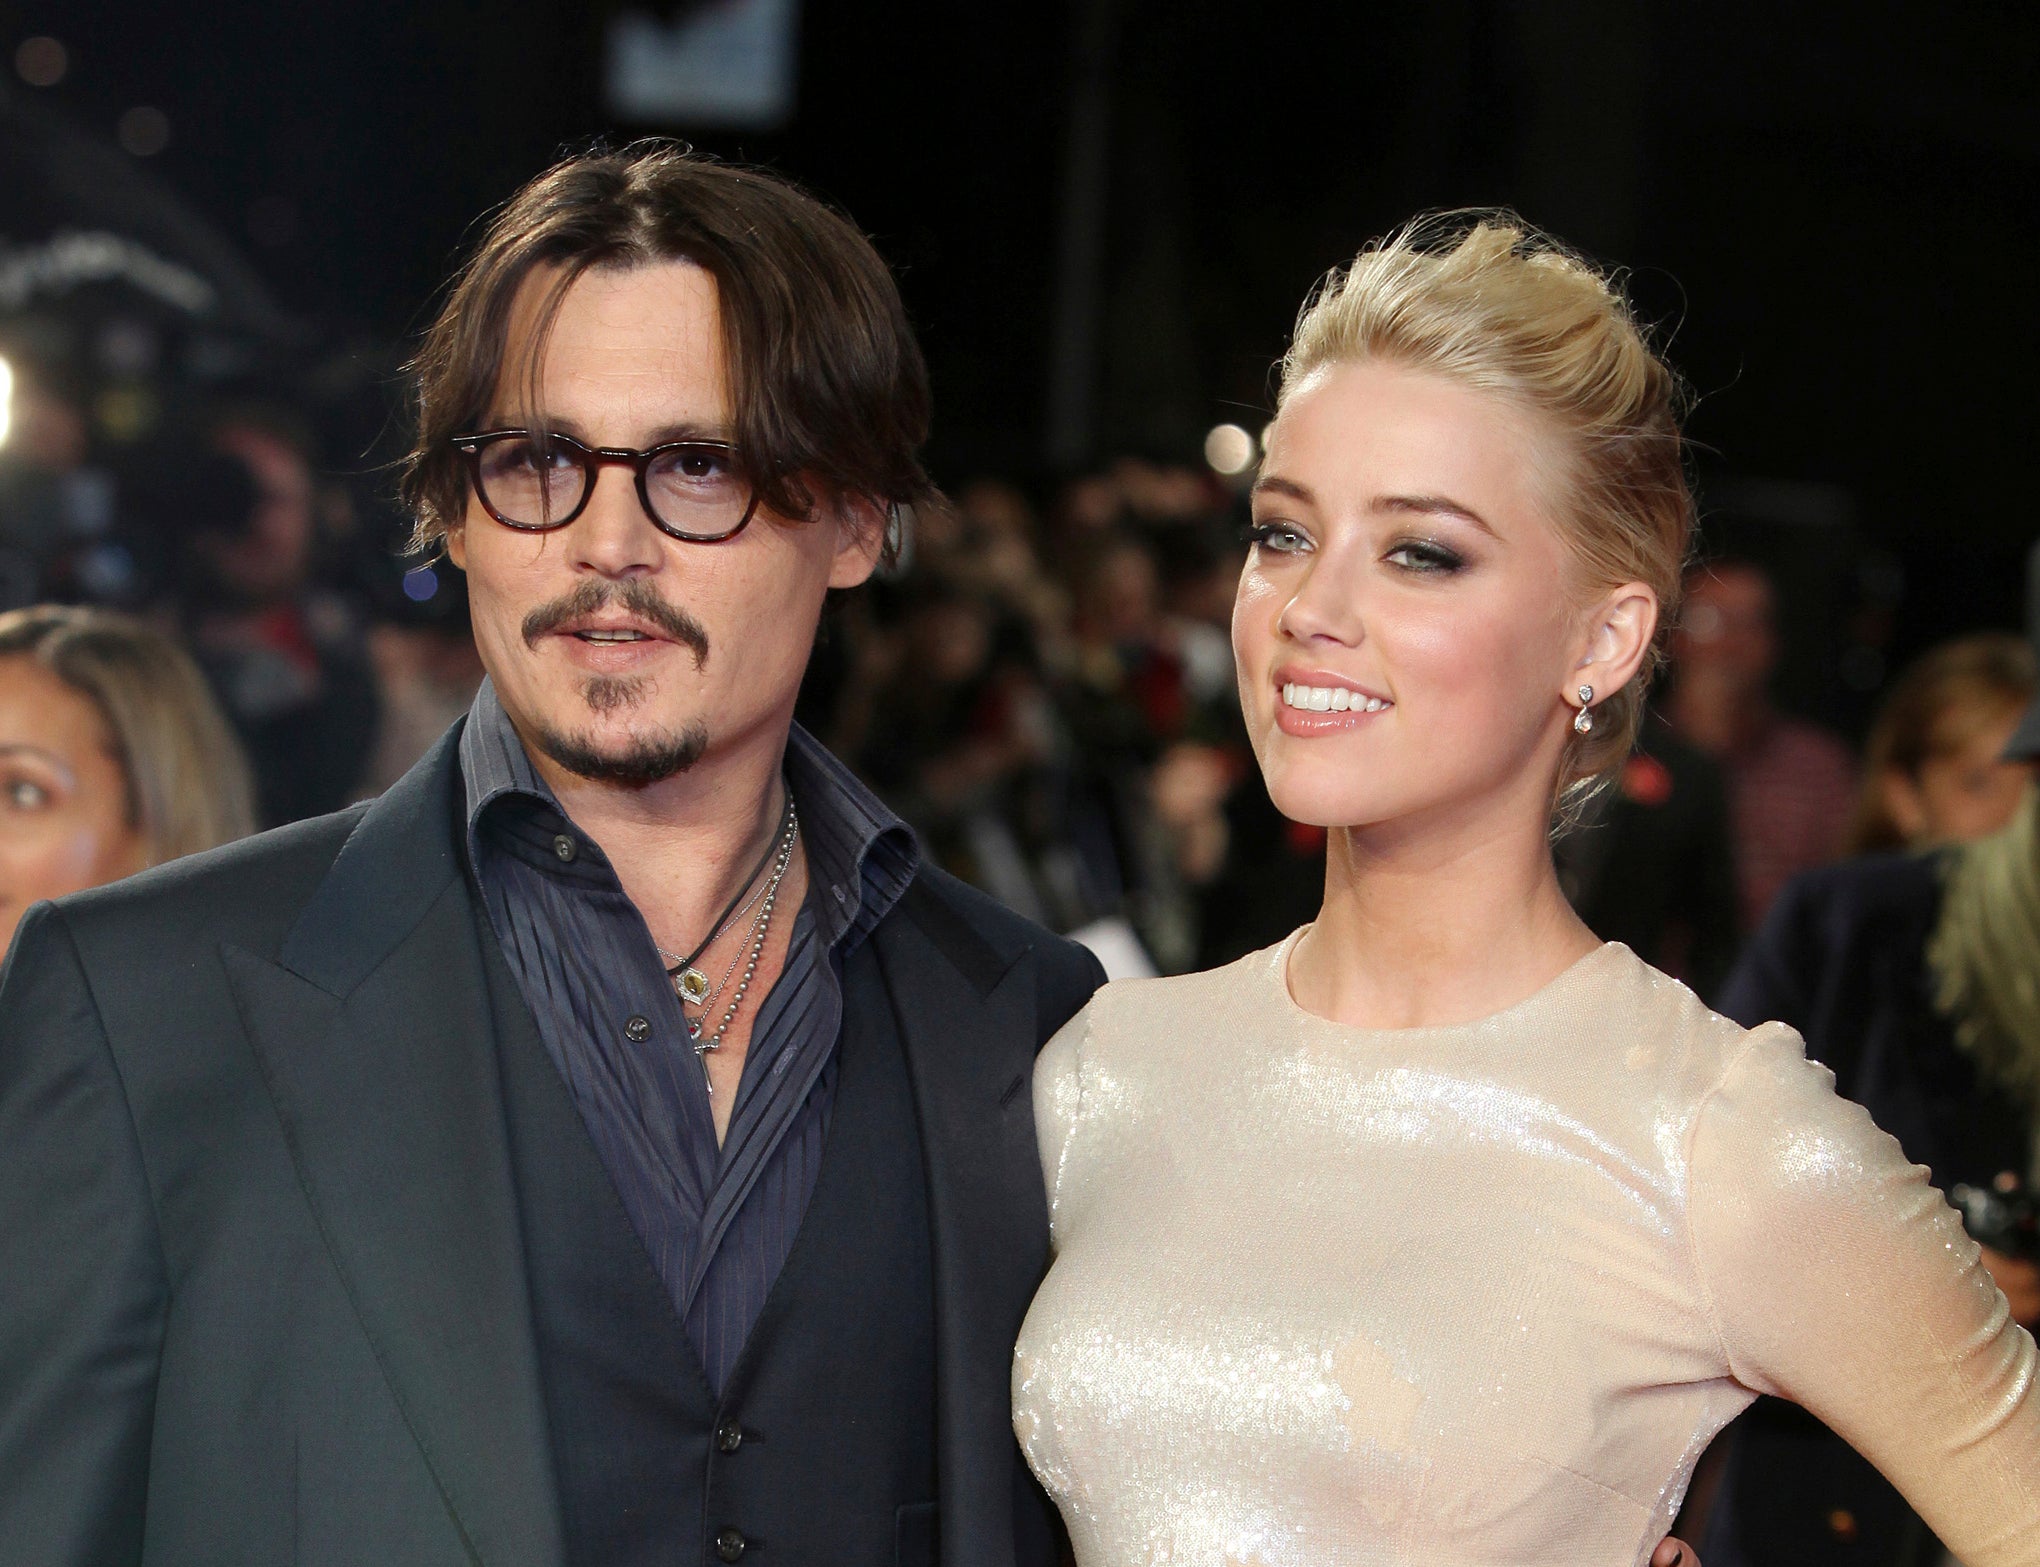 Johnny Depp and Amber Heard arrive for the European premiere of ‘The Rum Diary’ in London